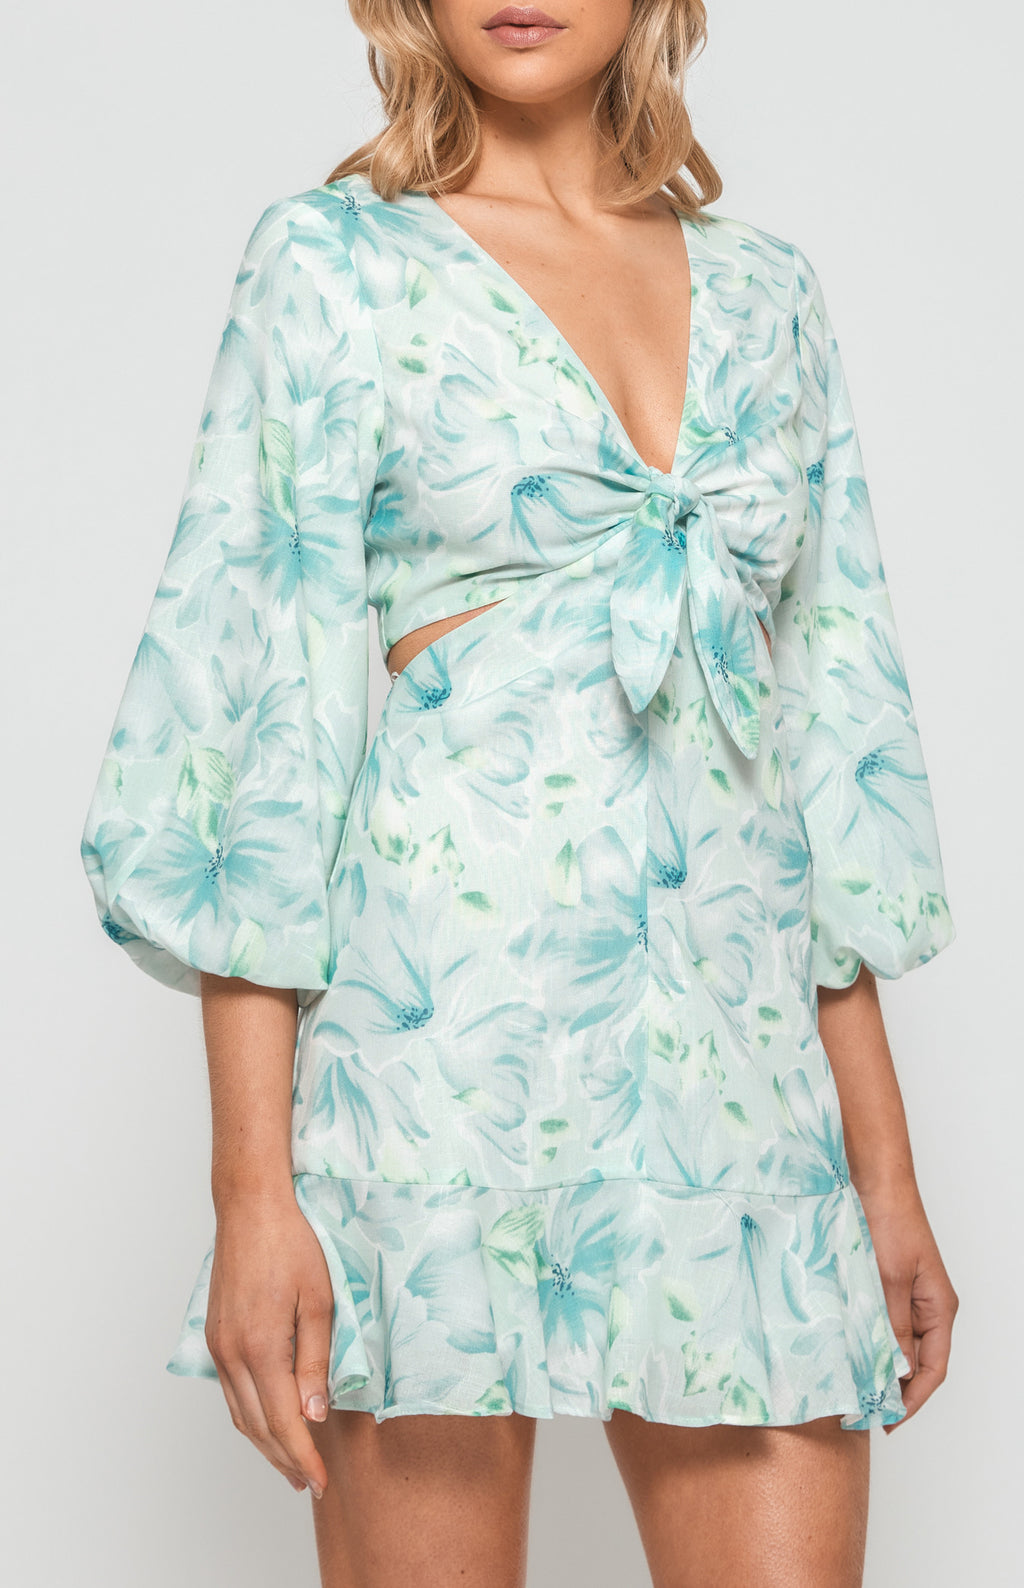 Winnie & Floral Dress with front Tie - Aqua- WDR499A